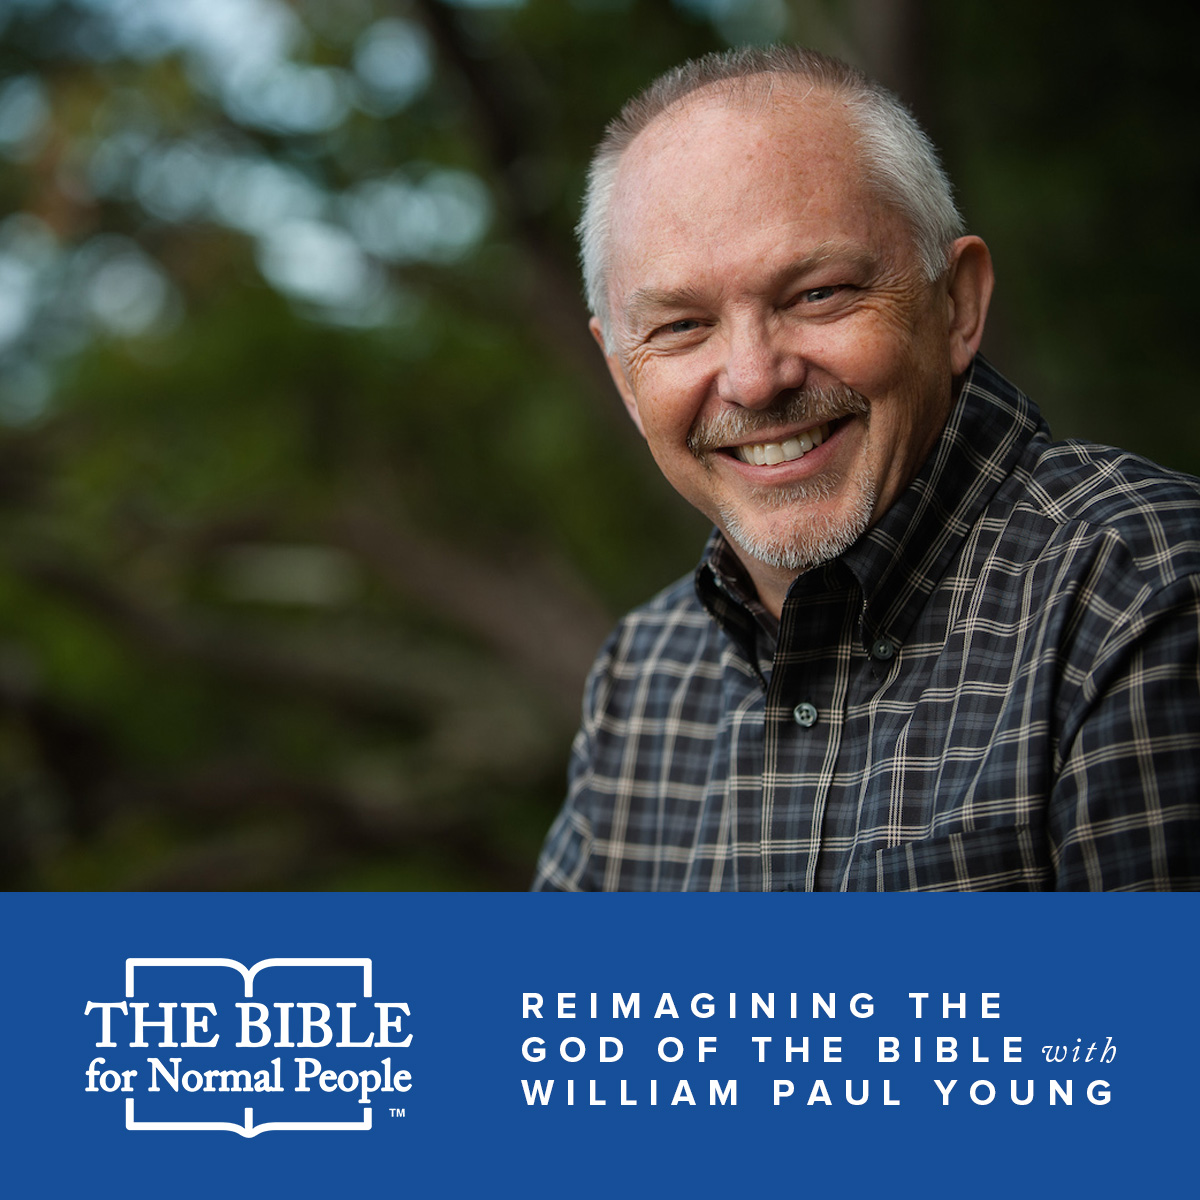 Reimagining God of the Bible with William Paul Young